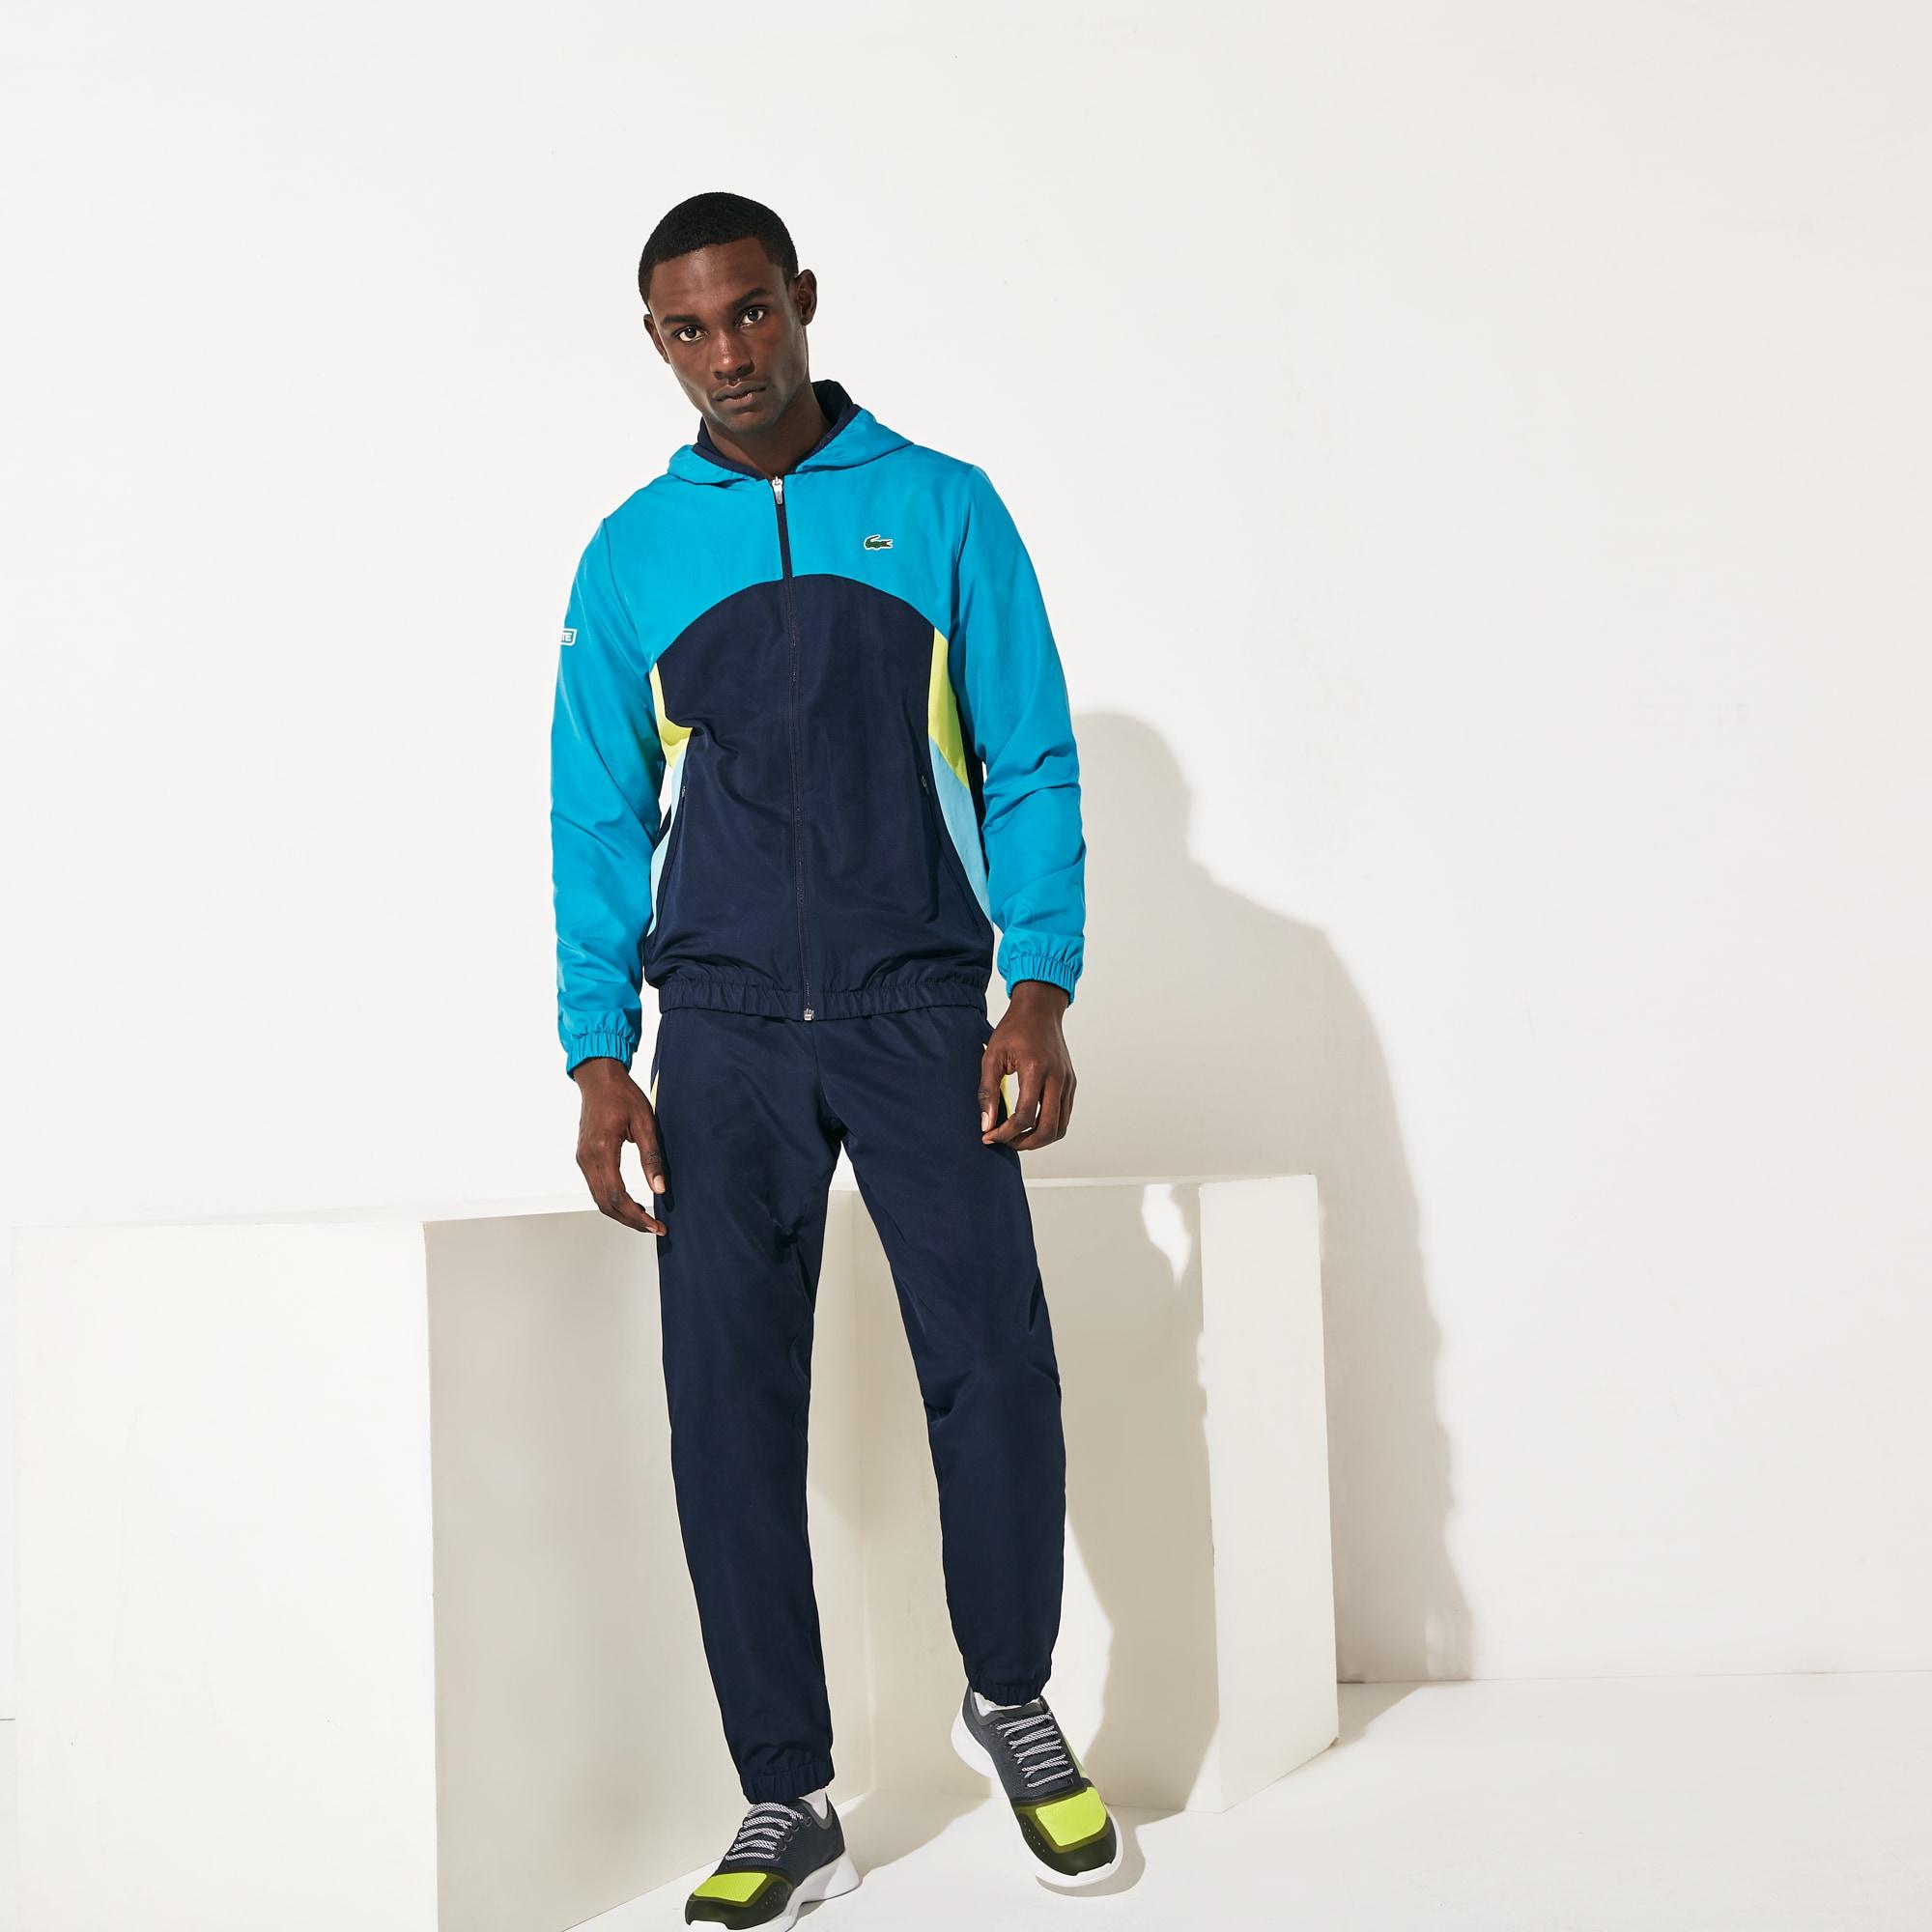 Lacoste Men's Sport Hooded Colorblock Tracksuit in Turquoise,Navy Blue ...